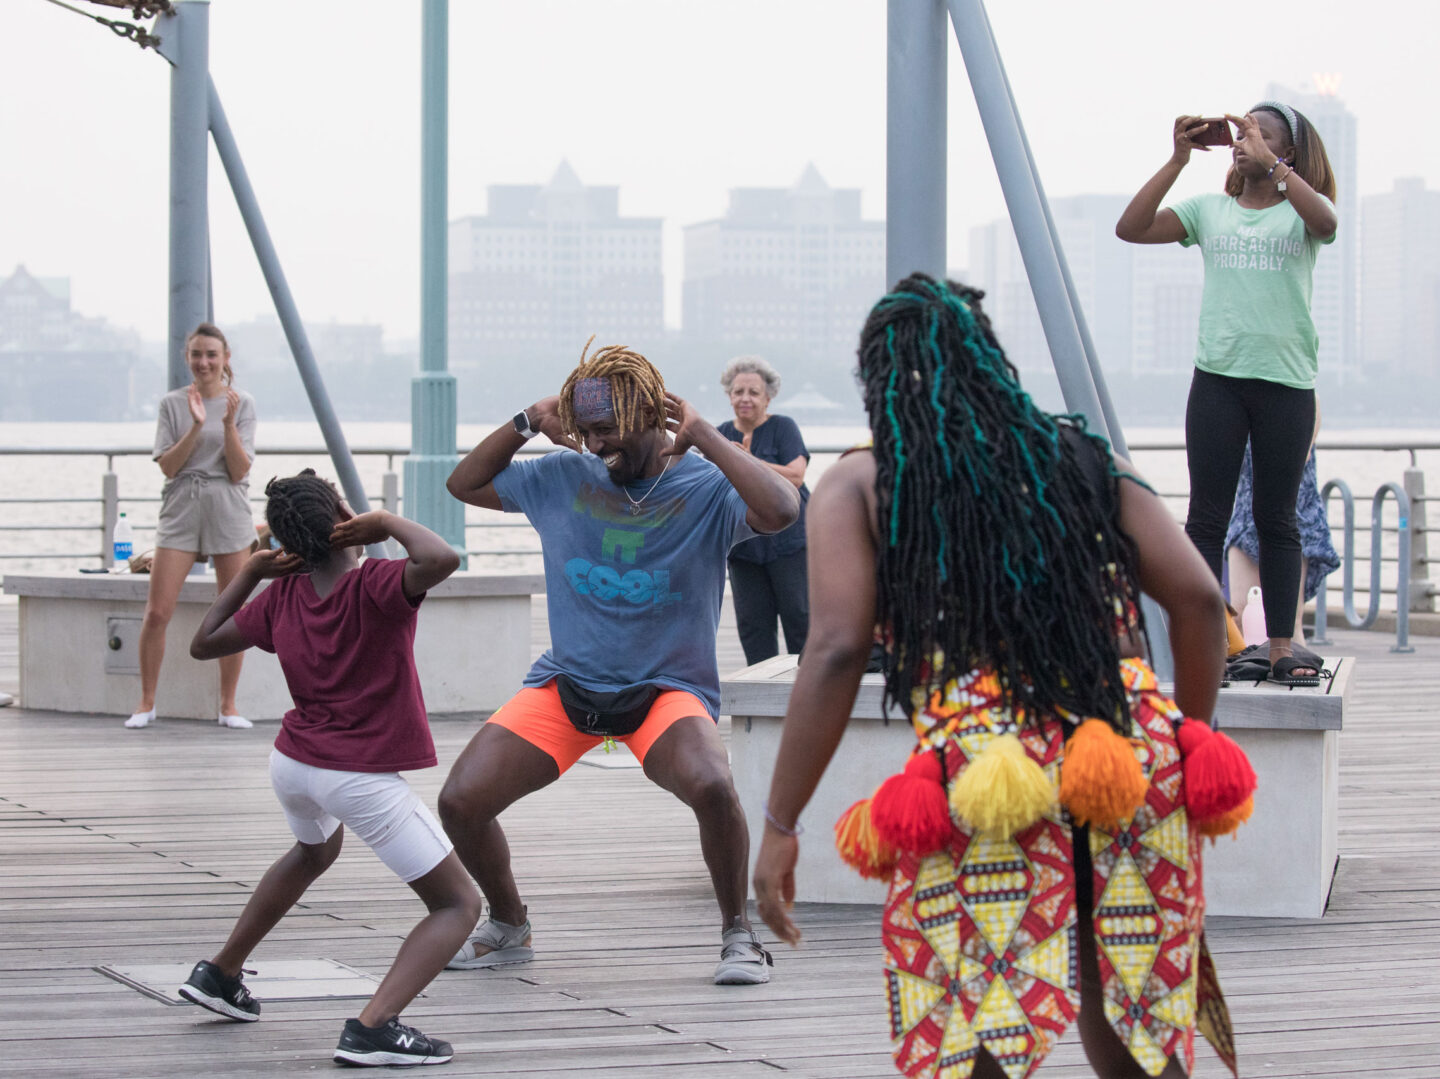 Batingua Arts dance lesson and performance at Pier 45 in Hudson River Park